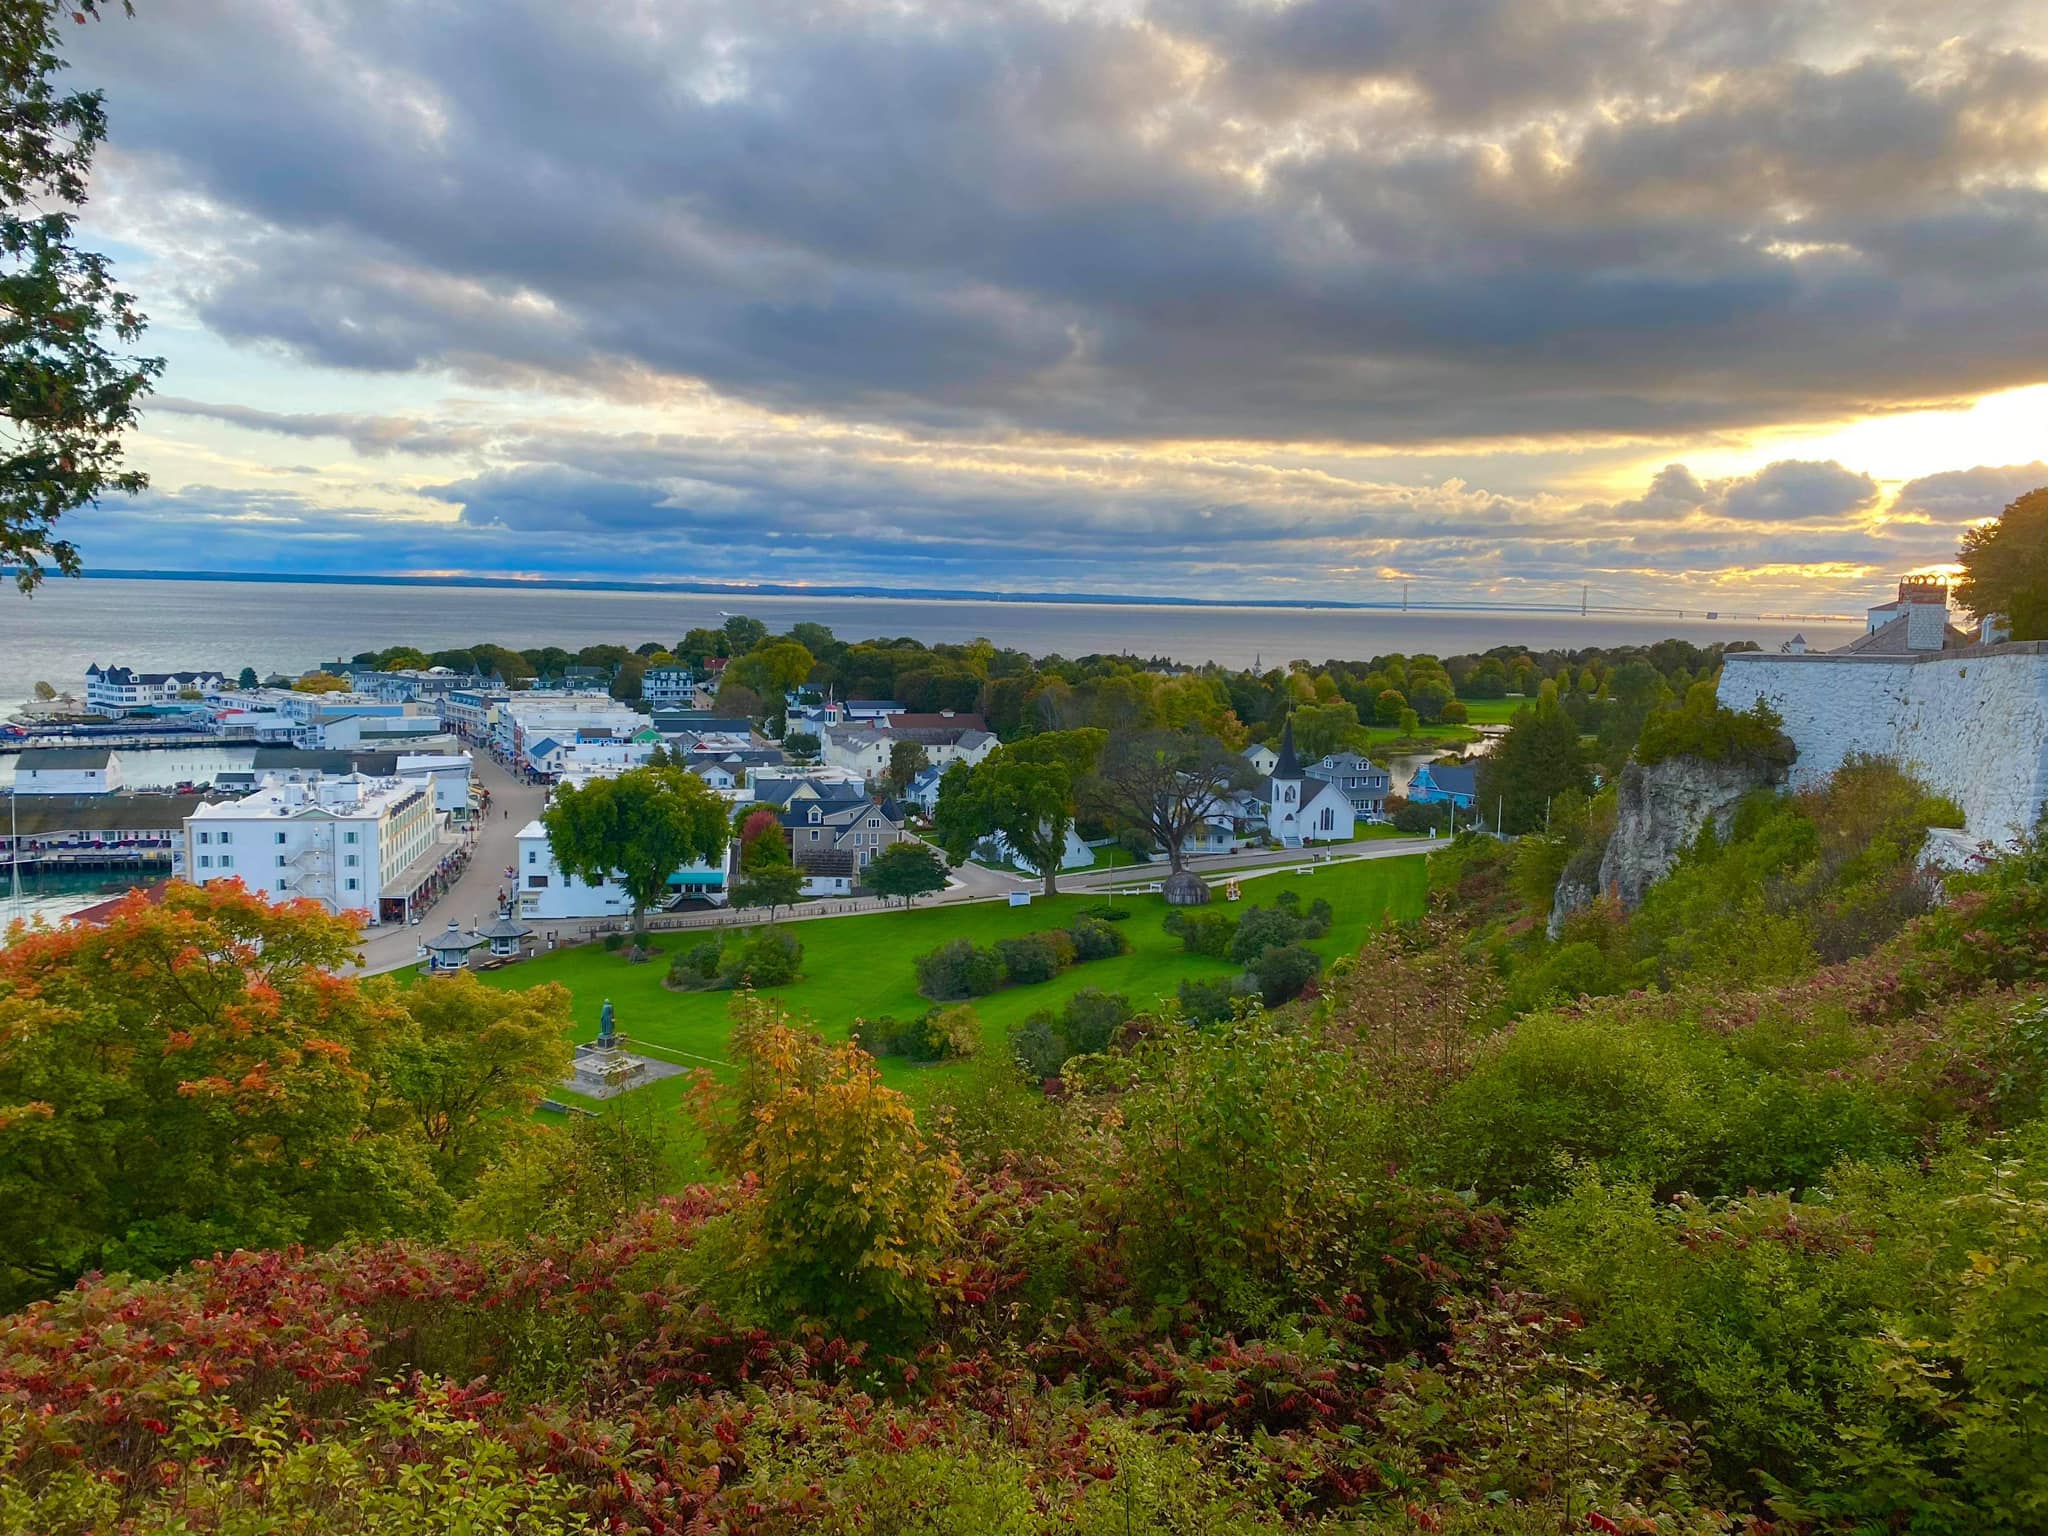 view of mackinac island and main street from atop a hill on mackinac island